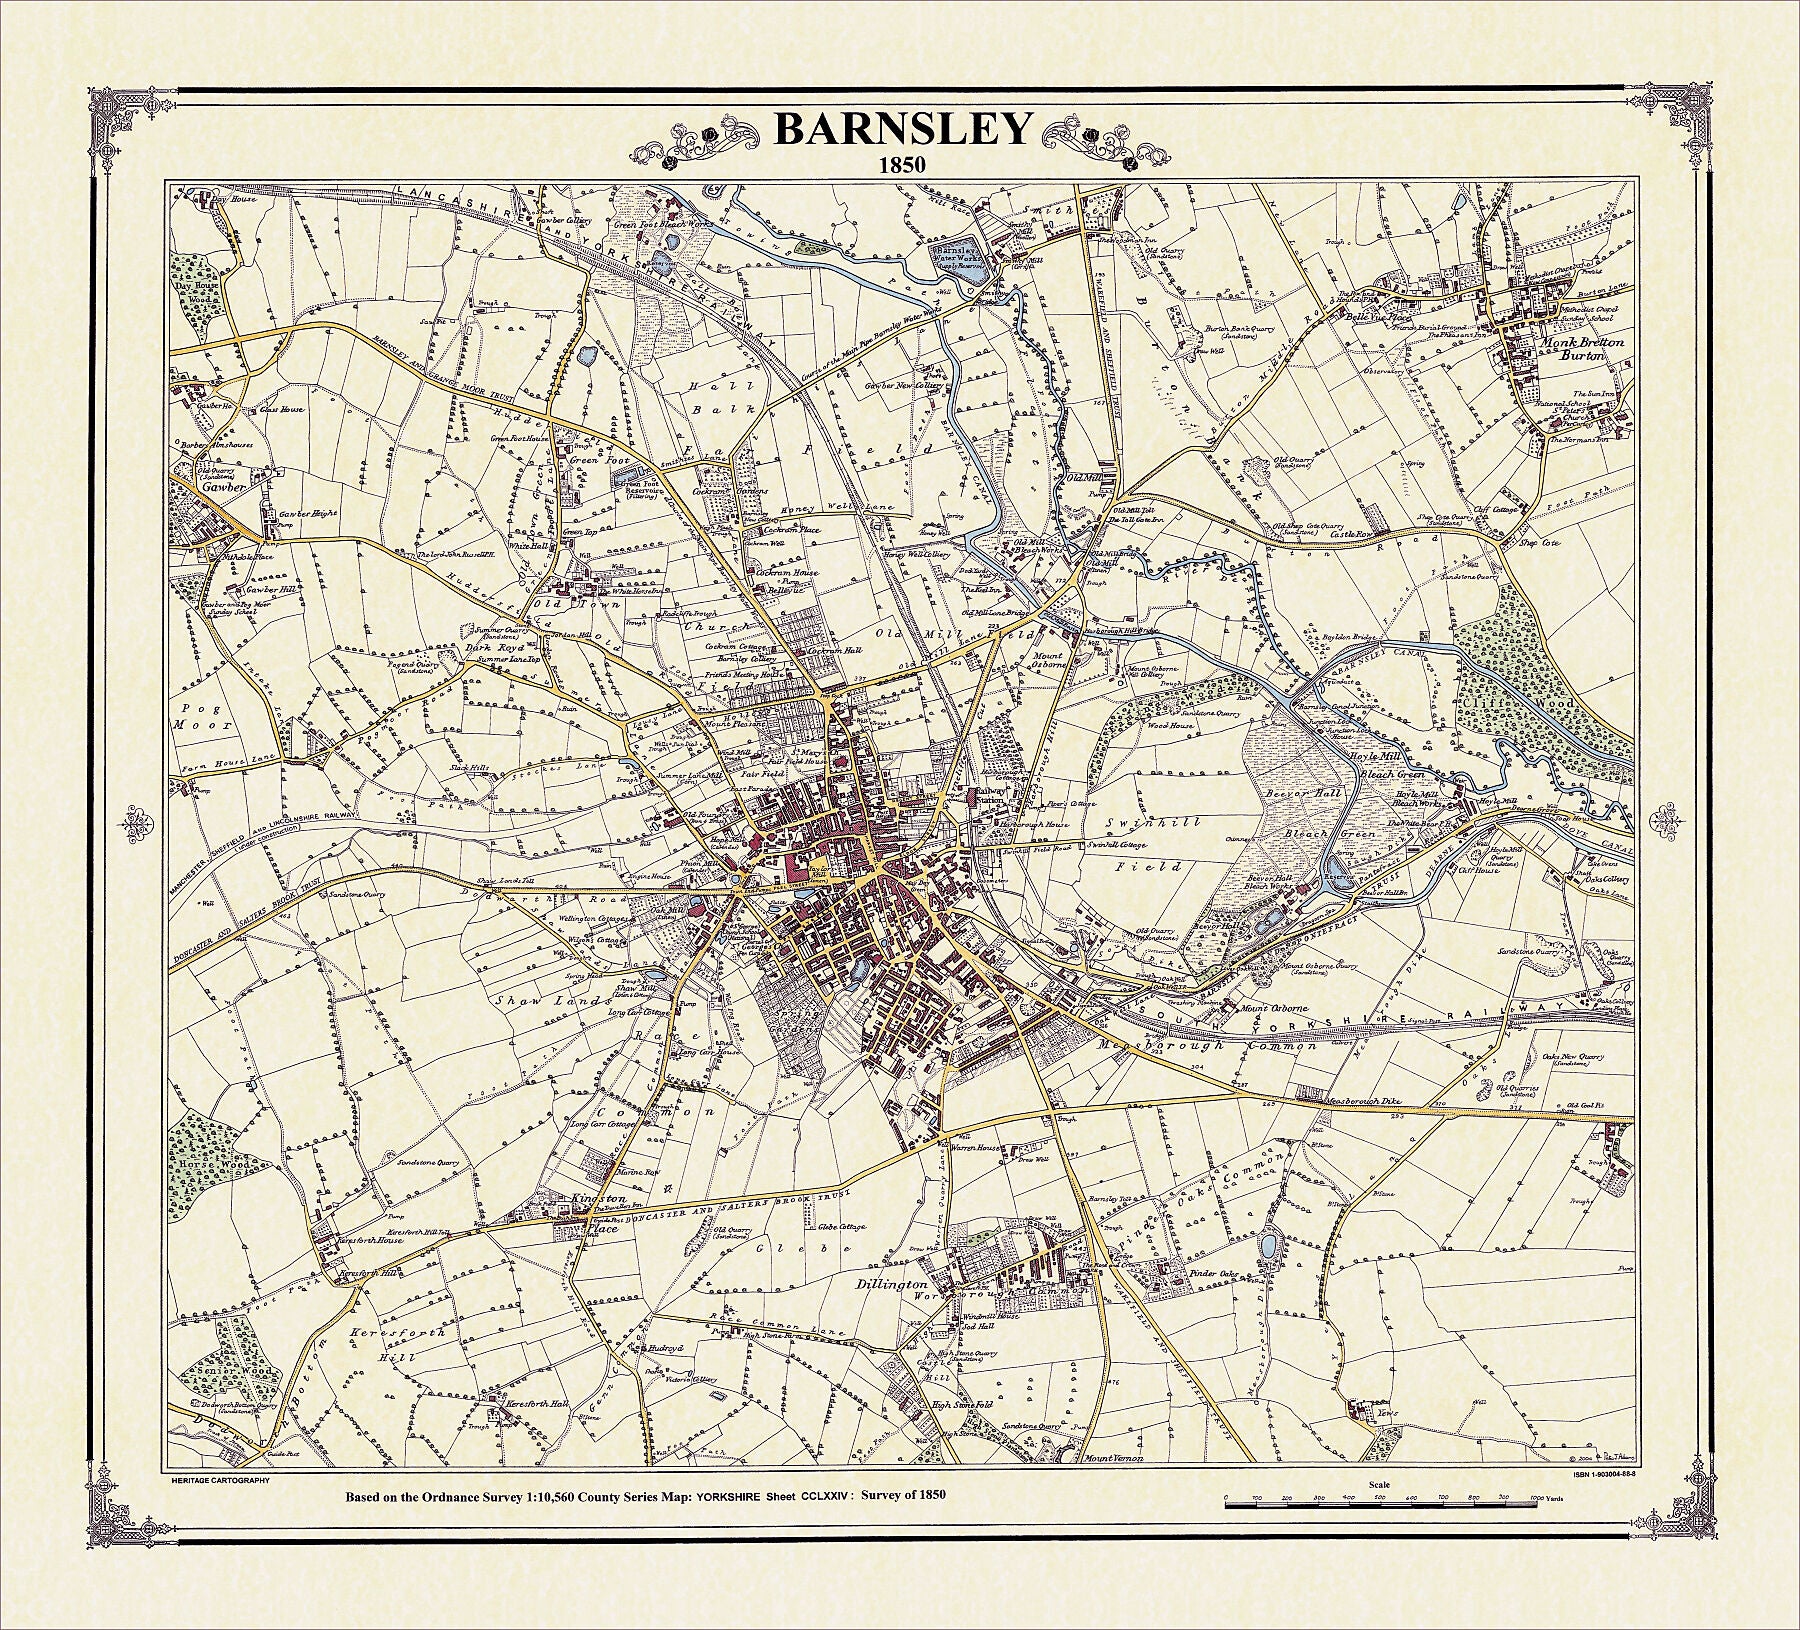 Coloured Victorian map of Barnsley in 1850 by Peter J Adams of Heritage Cartography